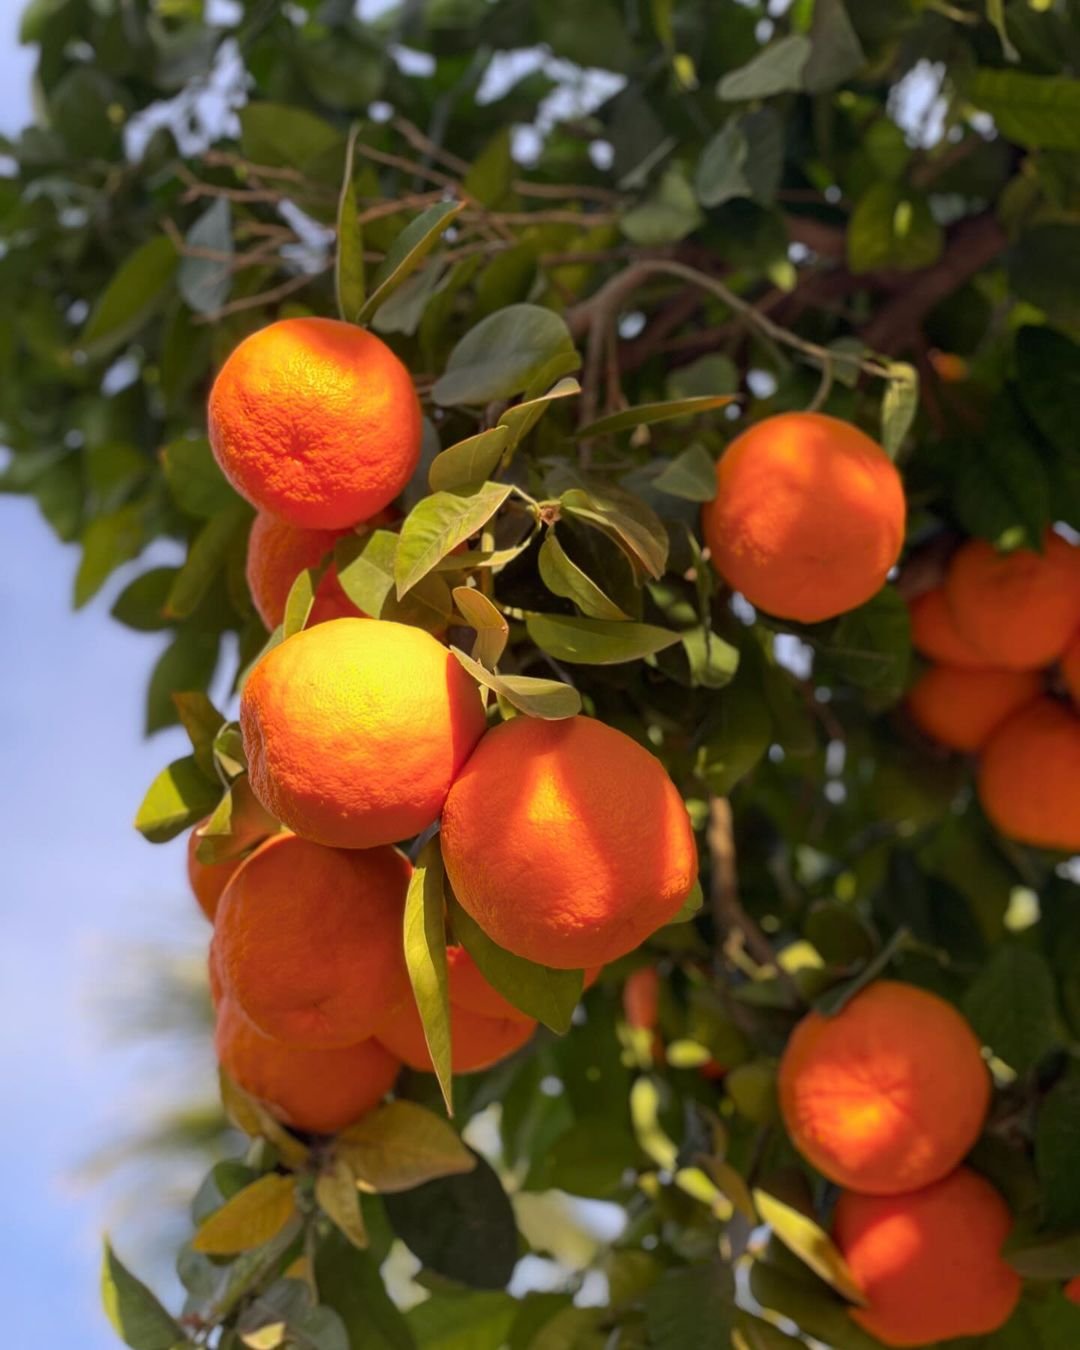 Fresh oranges growing on a tree, vibrant and colorful.